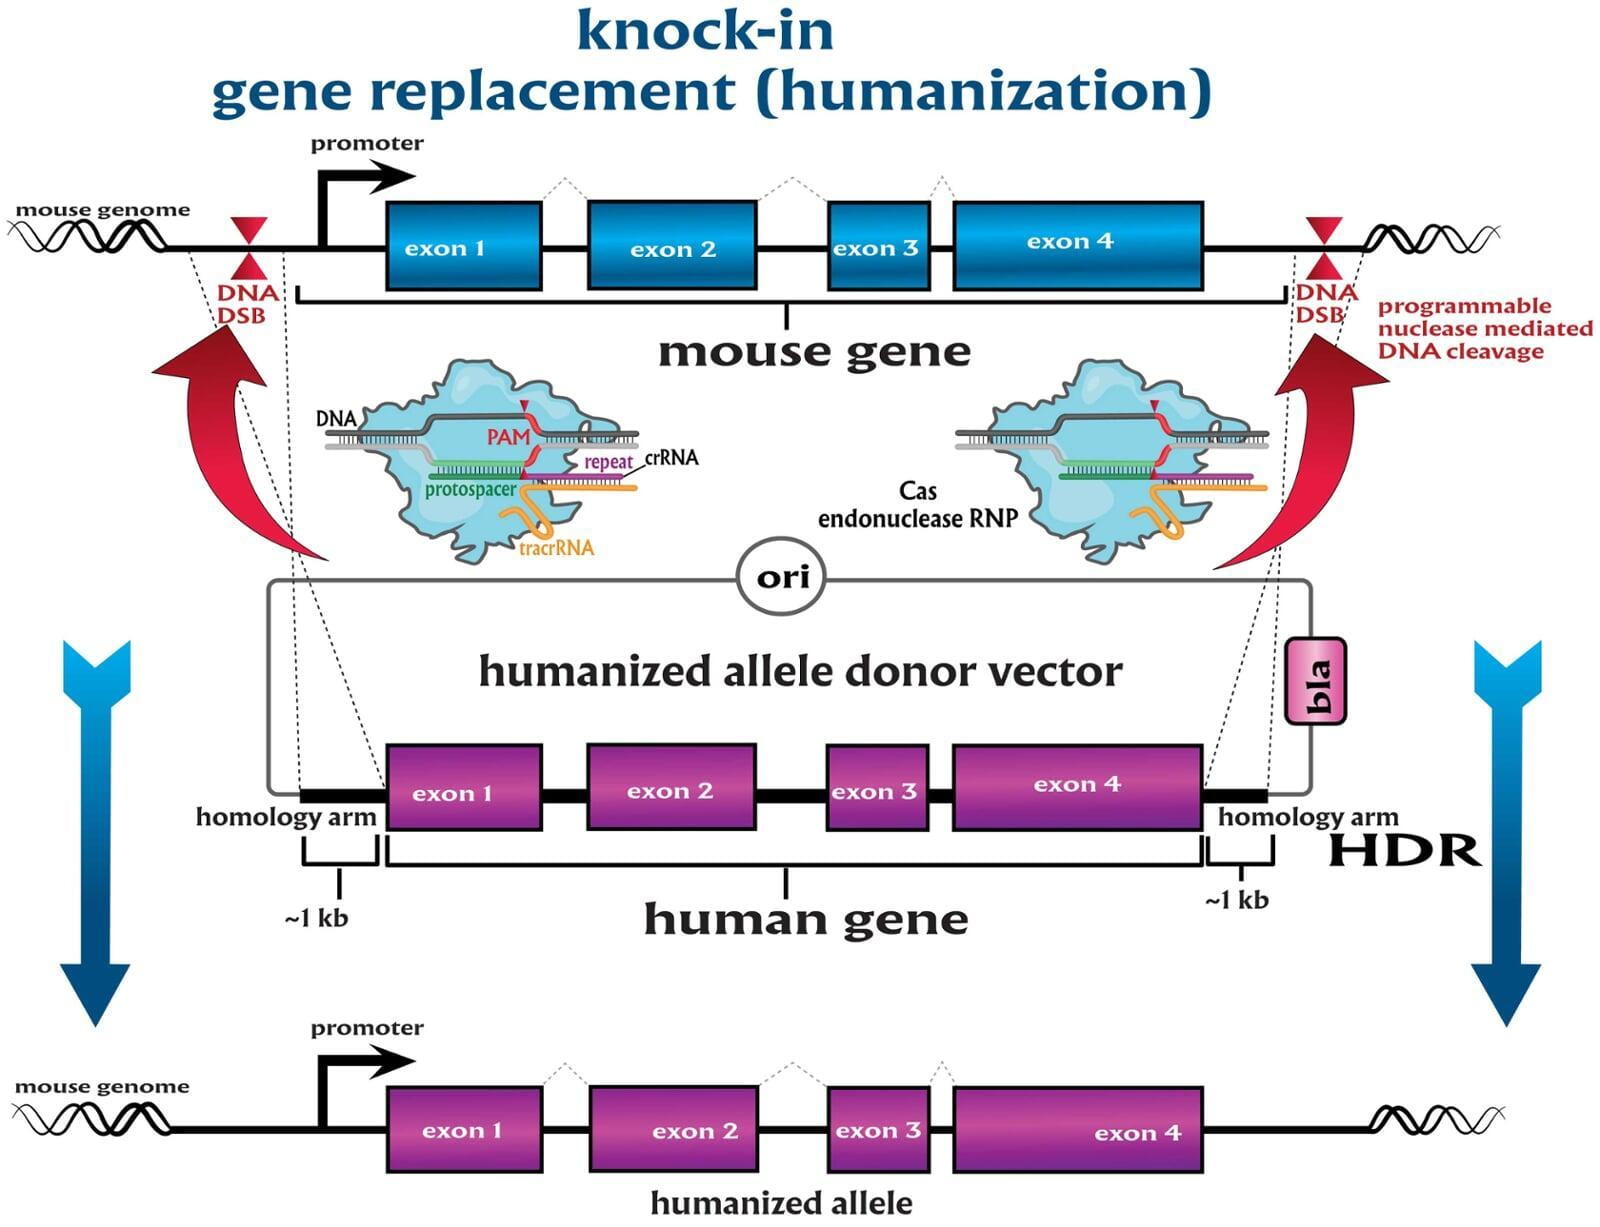 CRISPR-mediated knock-in of a humanized allele—gene replacement knock-in